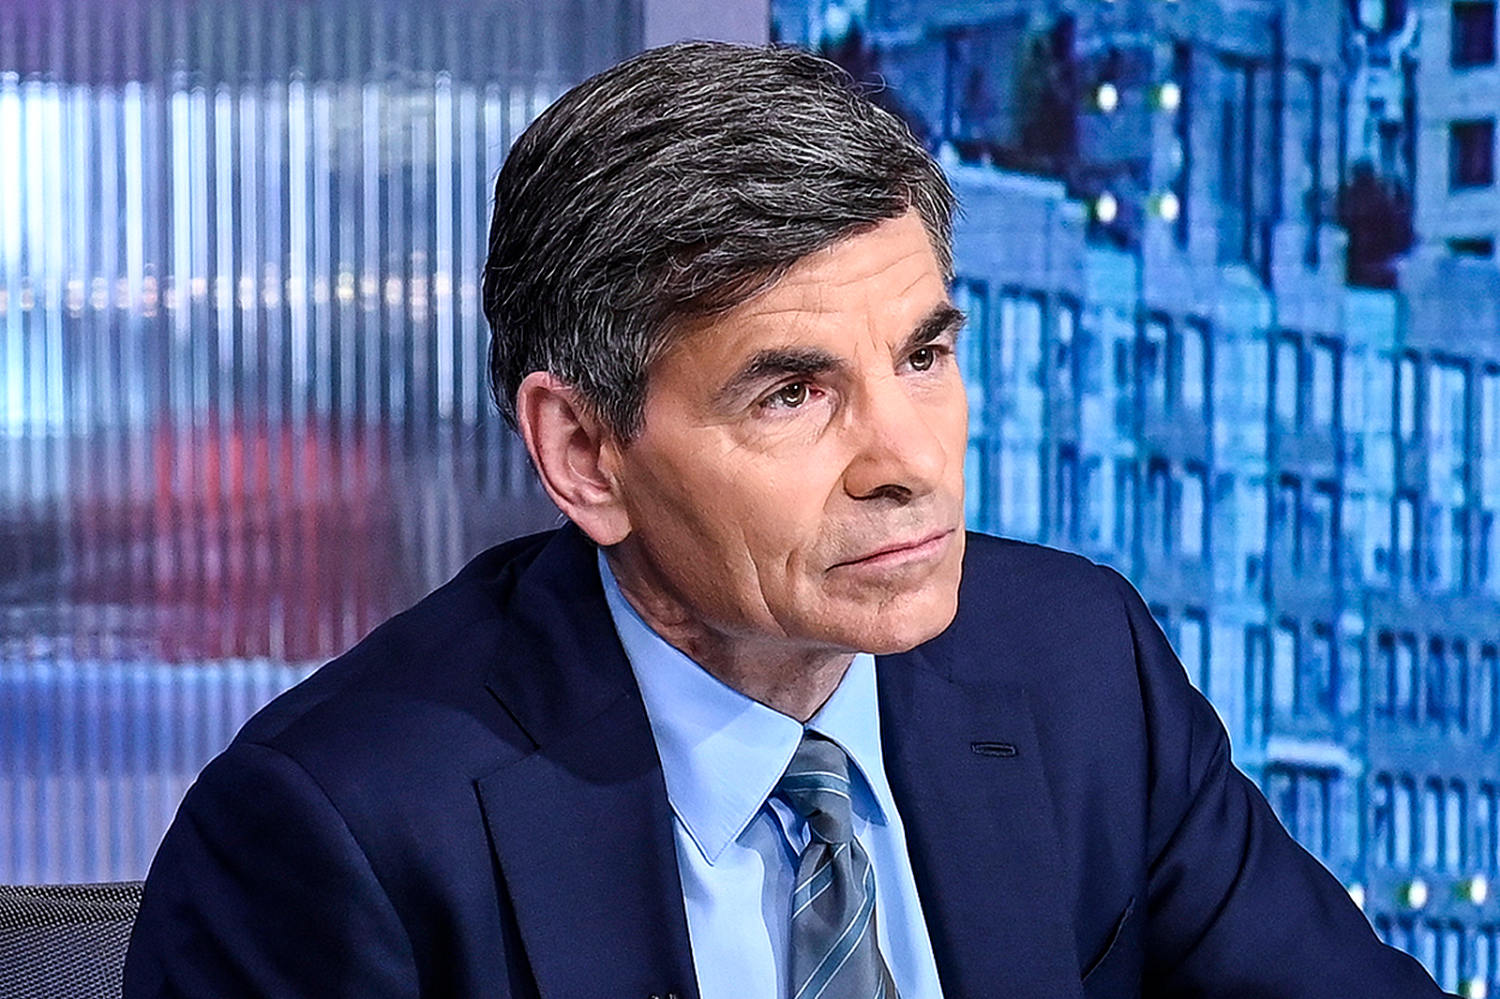 ABC's George Stephanopoulos says he regrets Biden comment to passerby